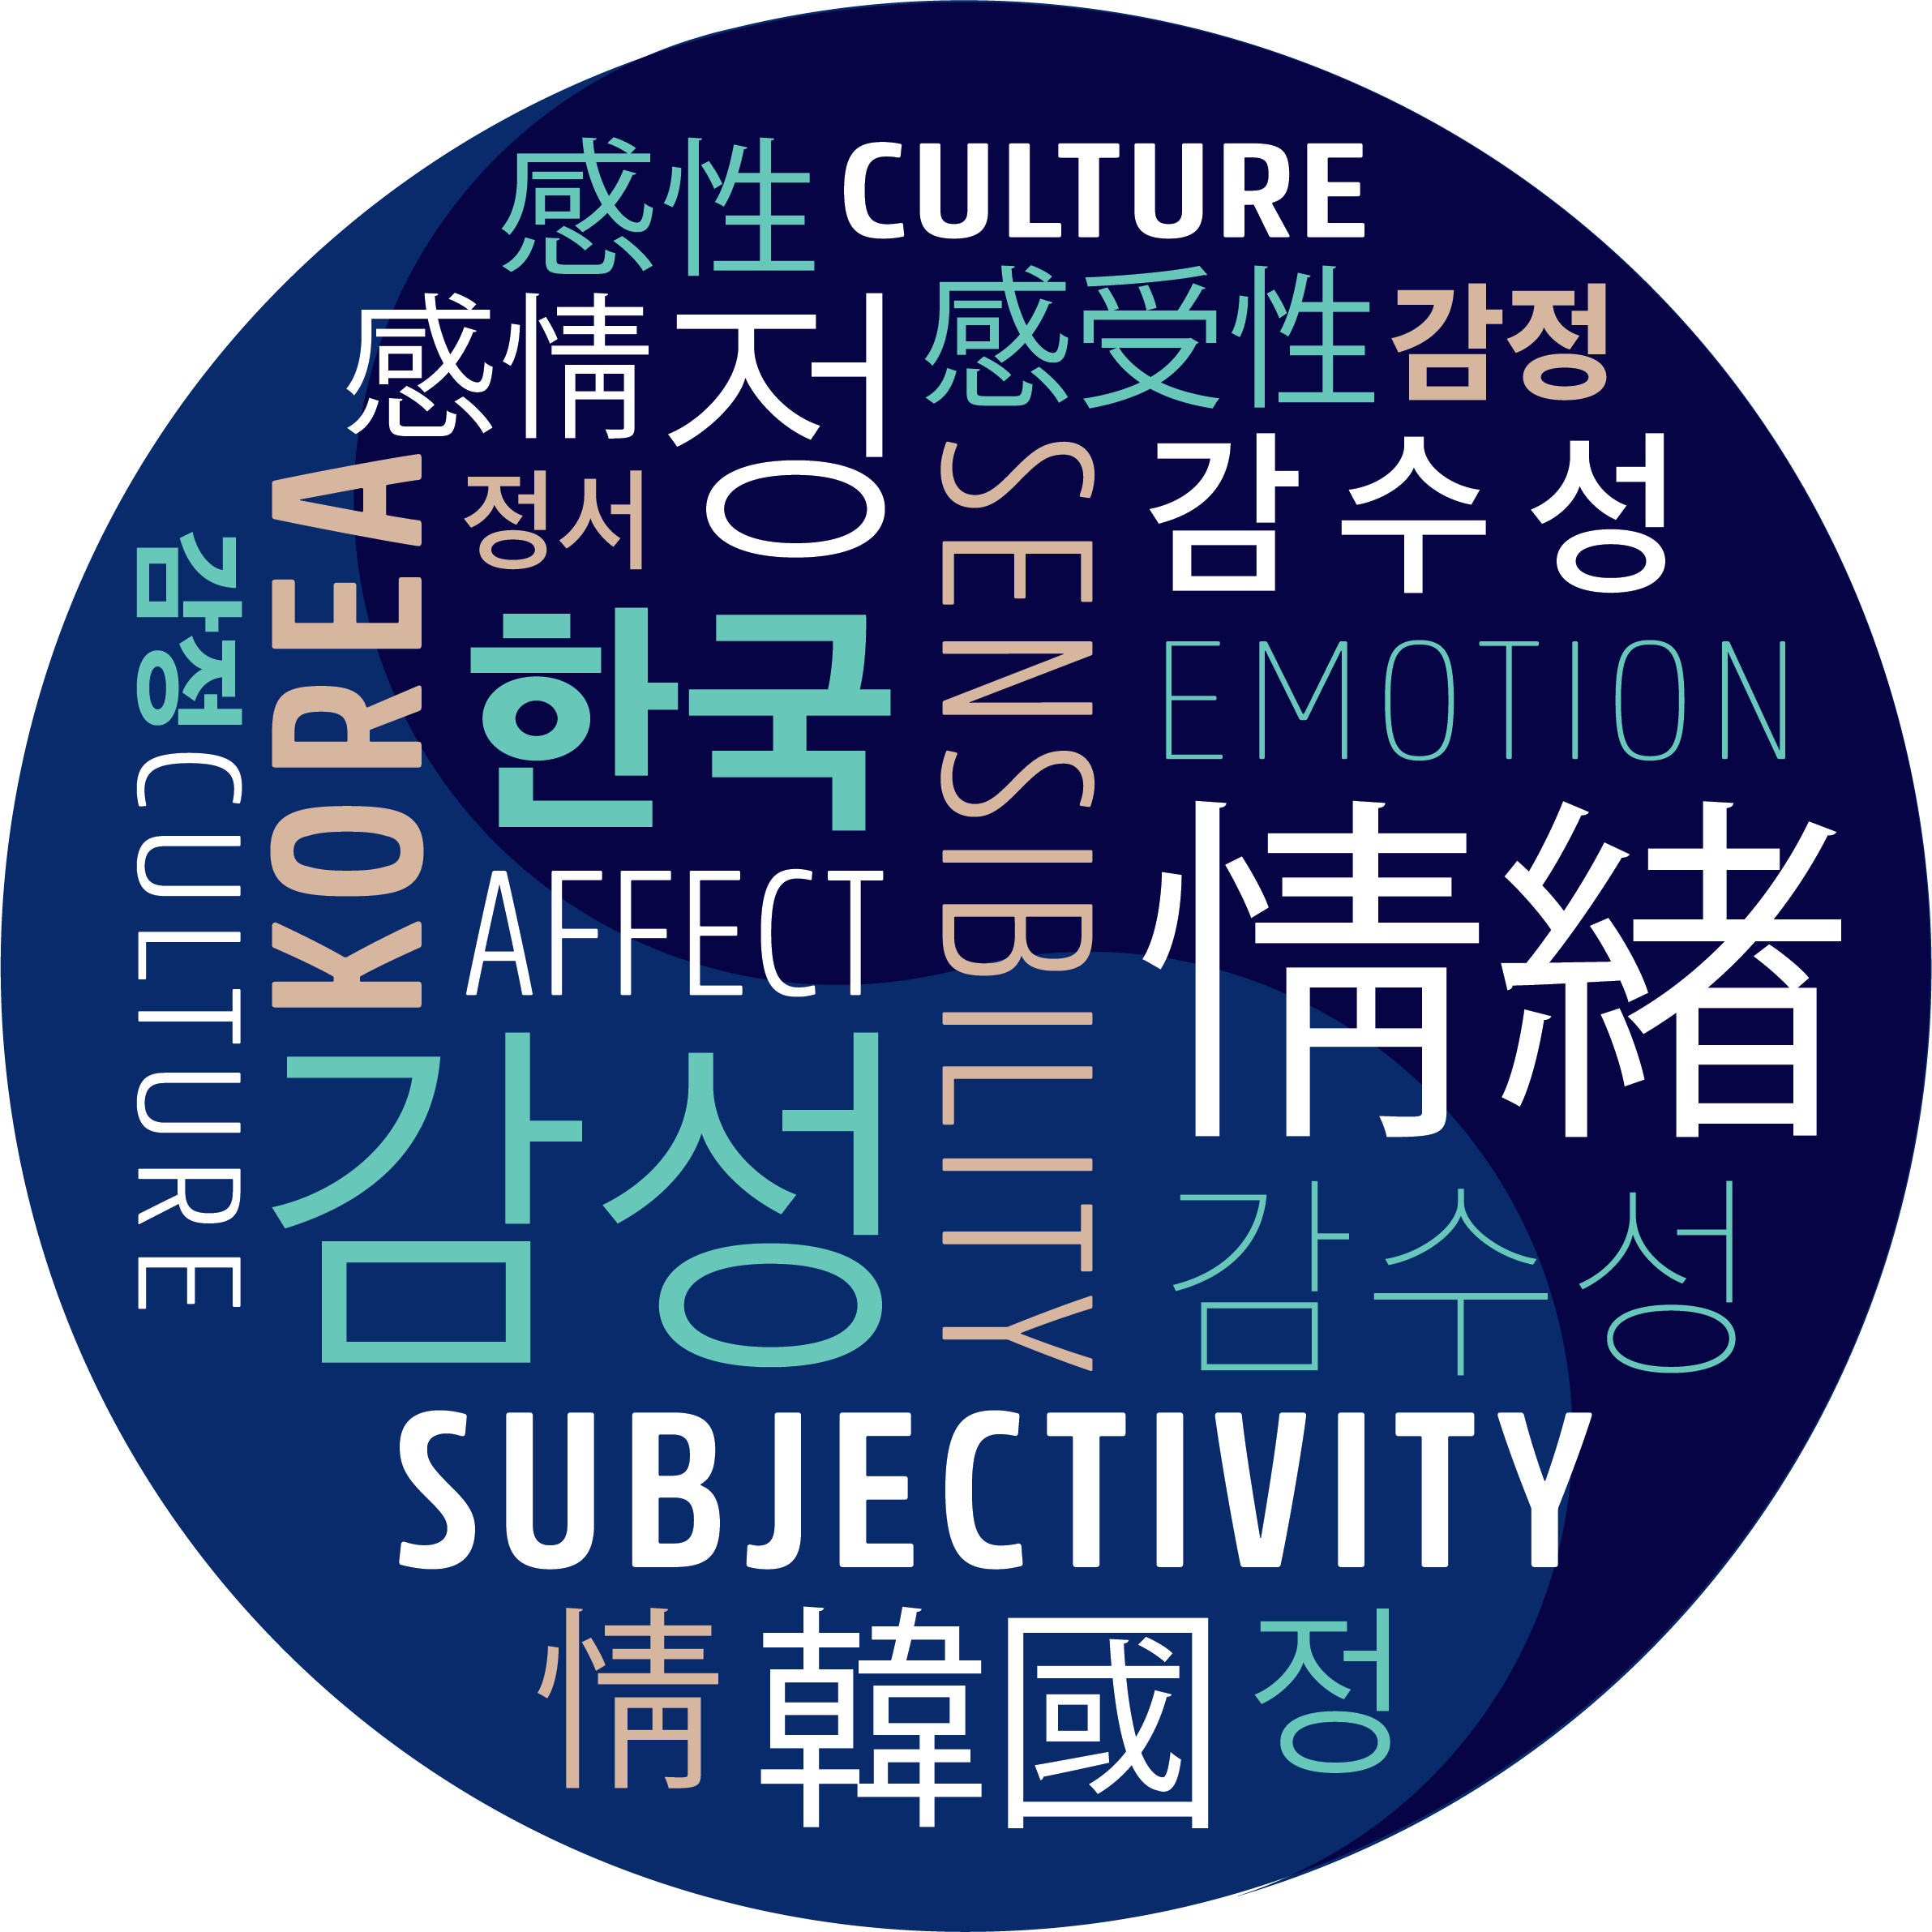 word cloud of various terms in English, Korean, and Chinese